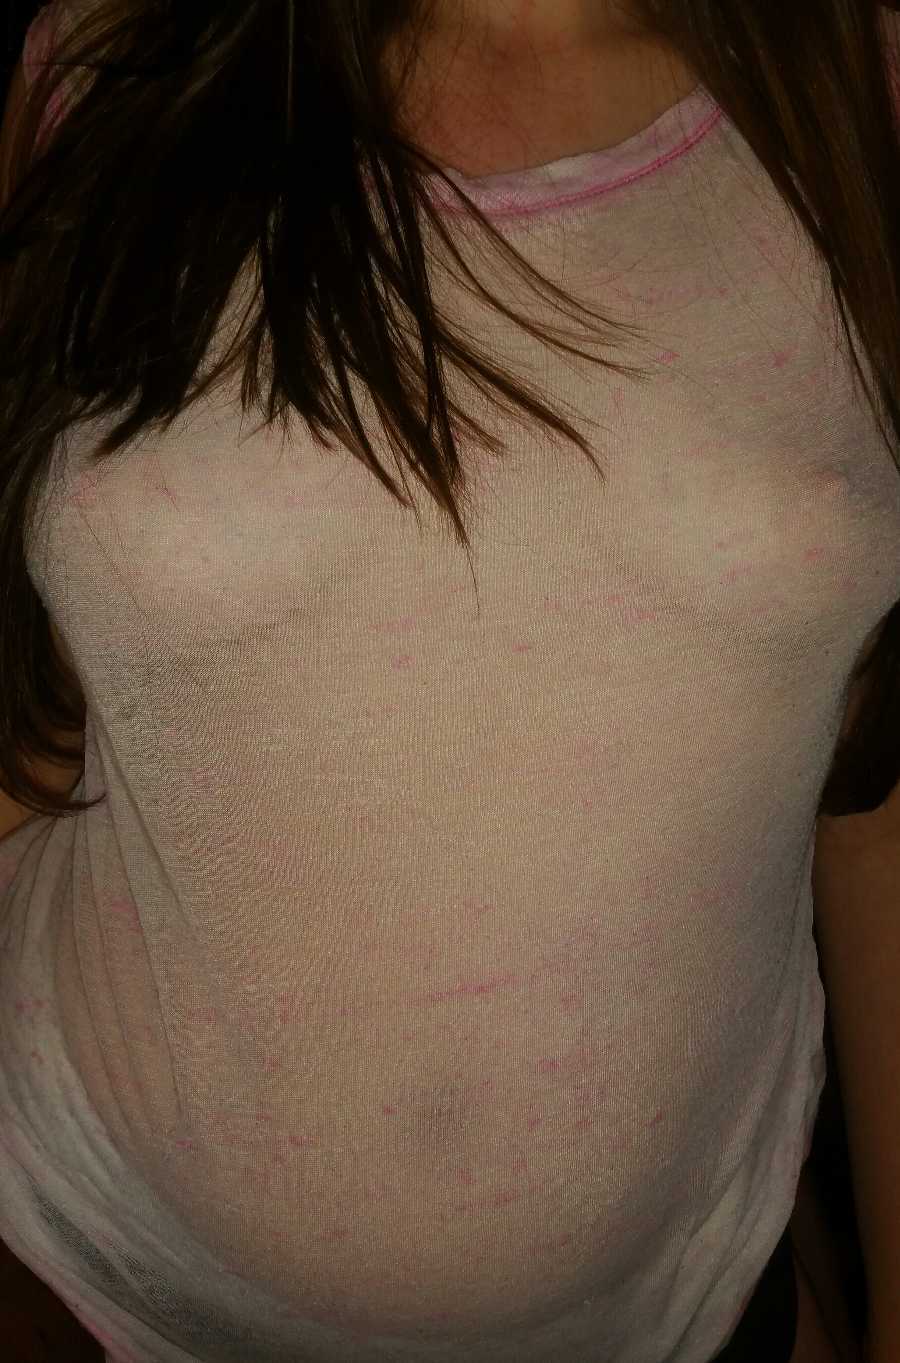 Cuckold Wife in T-Shirt who wants to Play